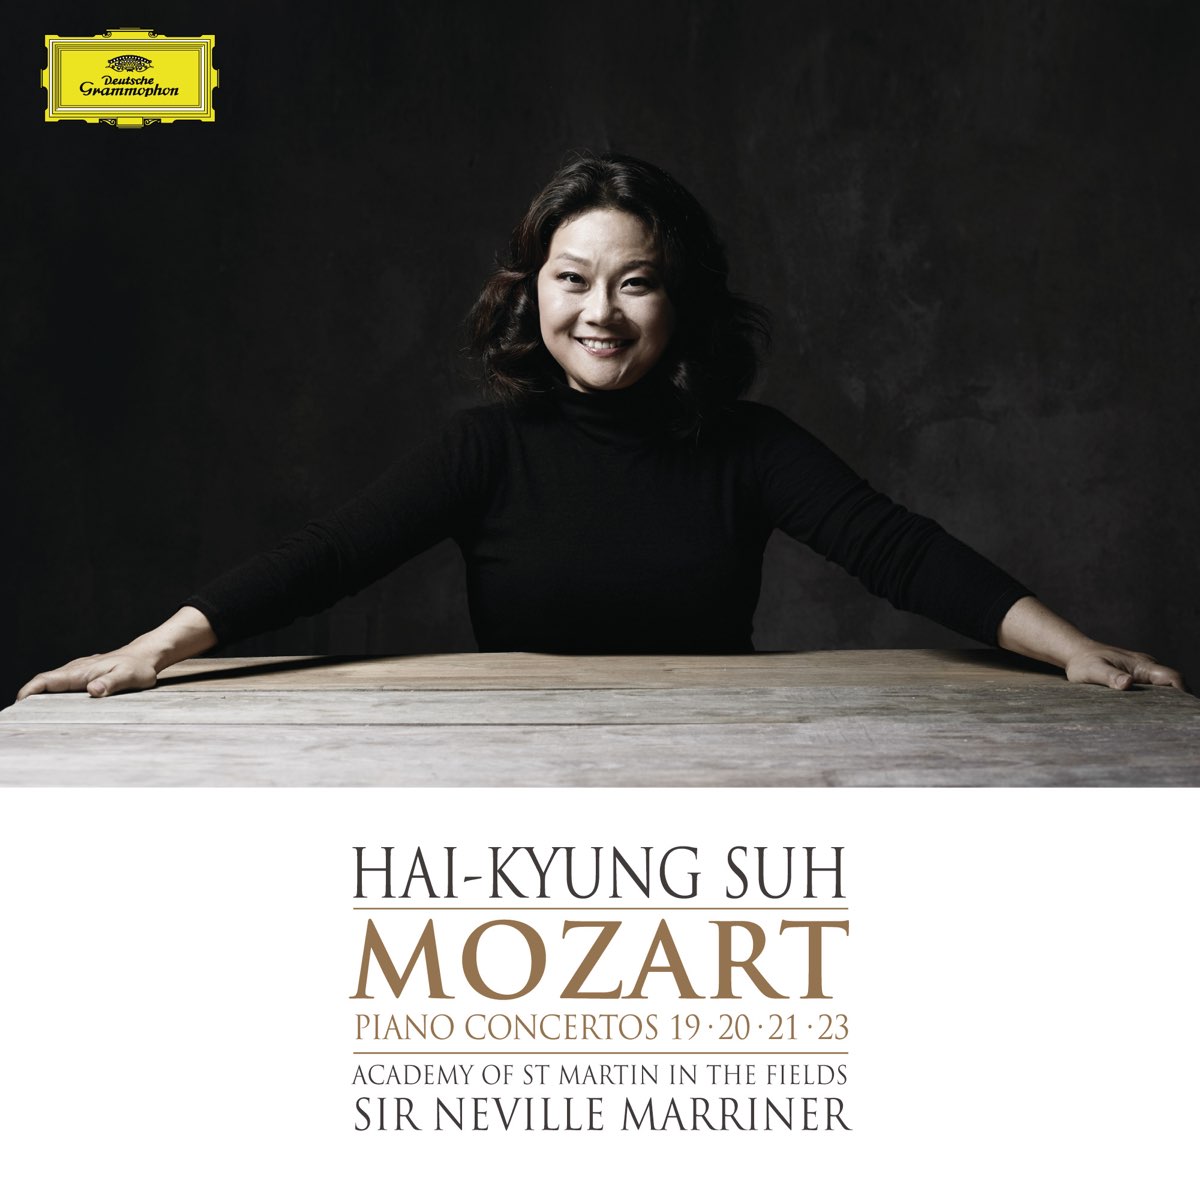 Mozart Piano Concertos 19∙20∙21∙23 by 서혜경, Sir Neville Marriner & Academy  of St Martin in the Fields on Apple Music